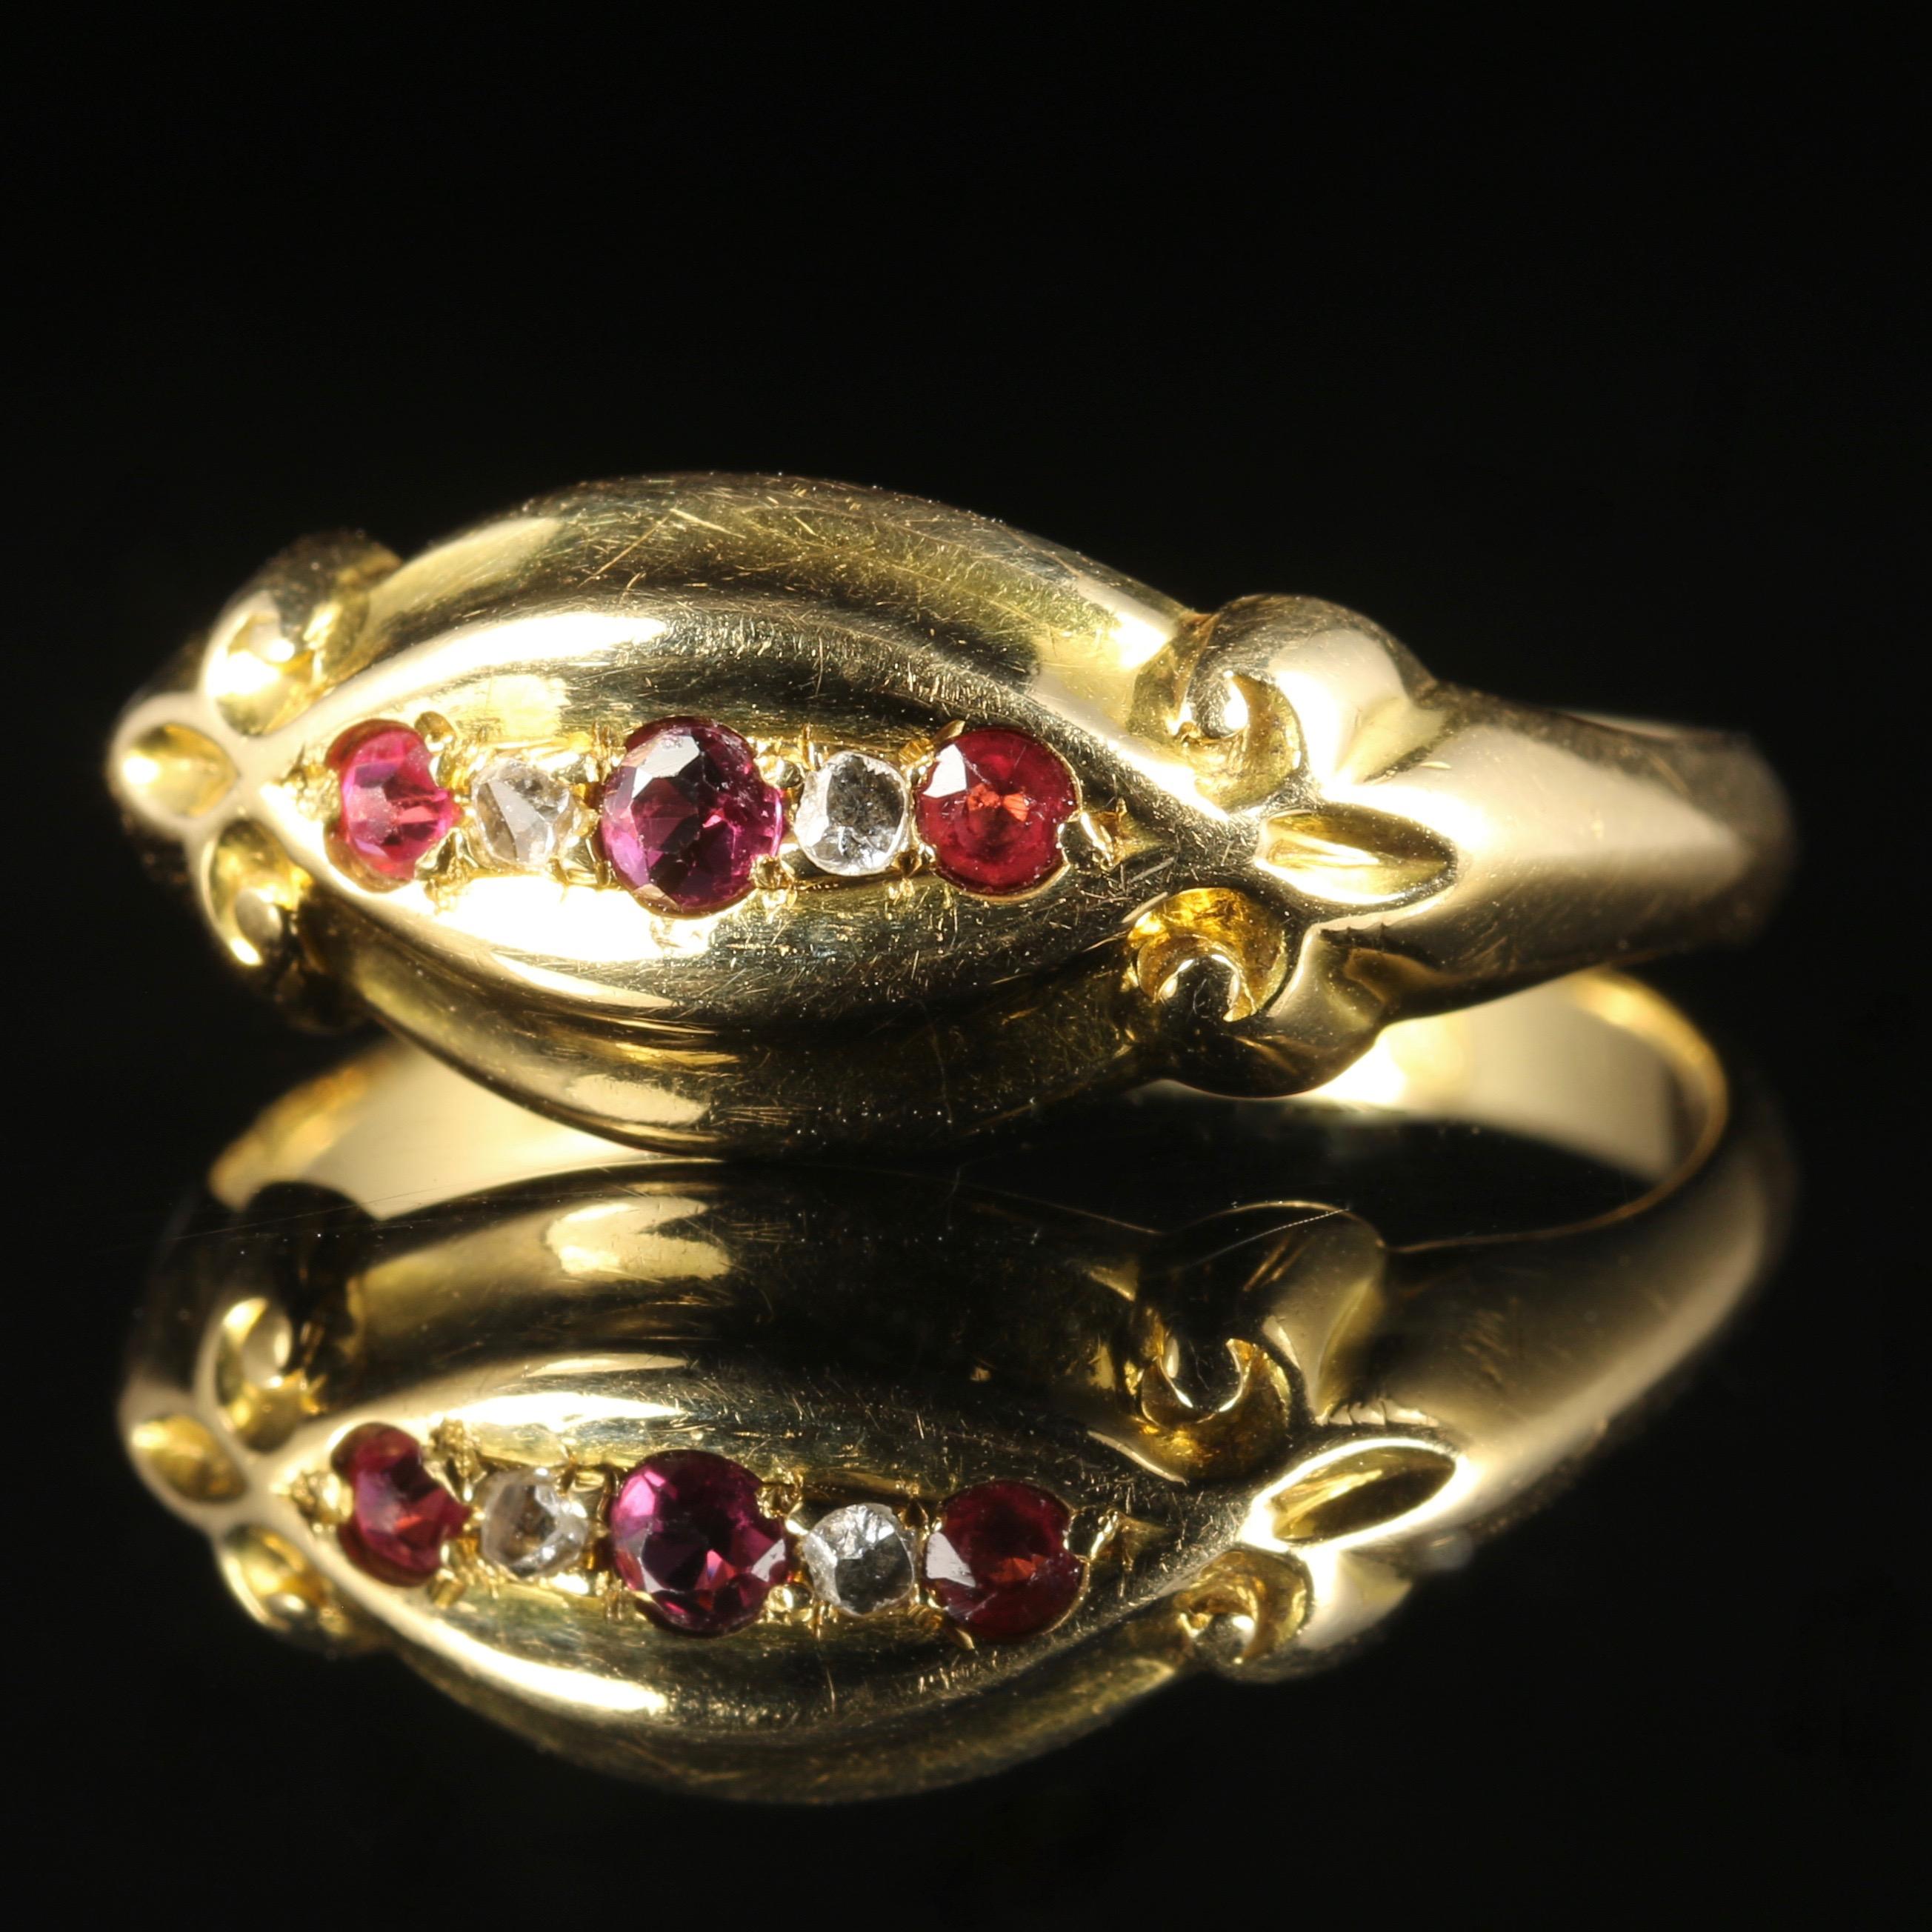 For more details please click continue reading down below...

This delightful Antique Ruby and Diamond ring is fully hallmarked 18ct Gold, dated Chester 1909.

Steeped in Edwardian history this lovely ring is set with three deep red natural Rubies